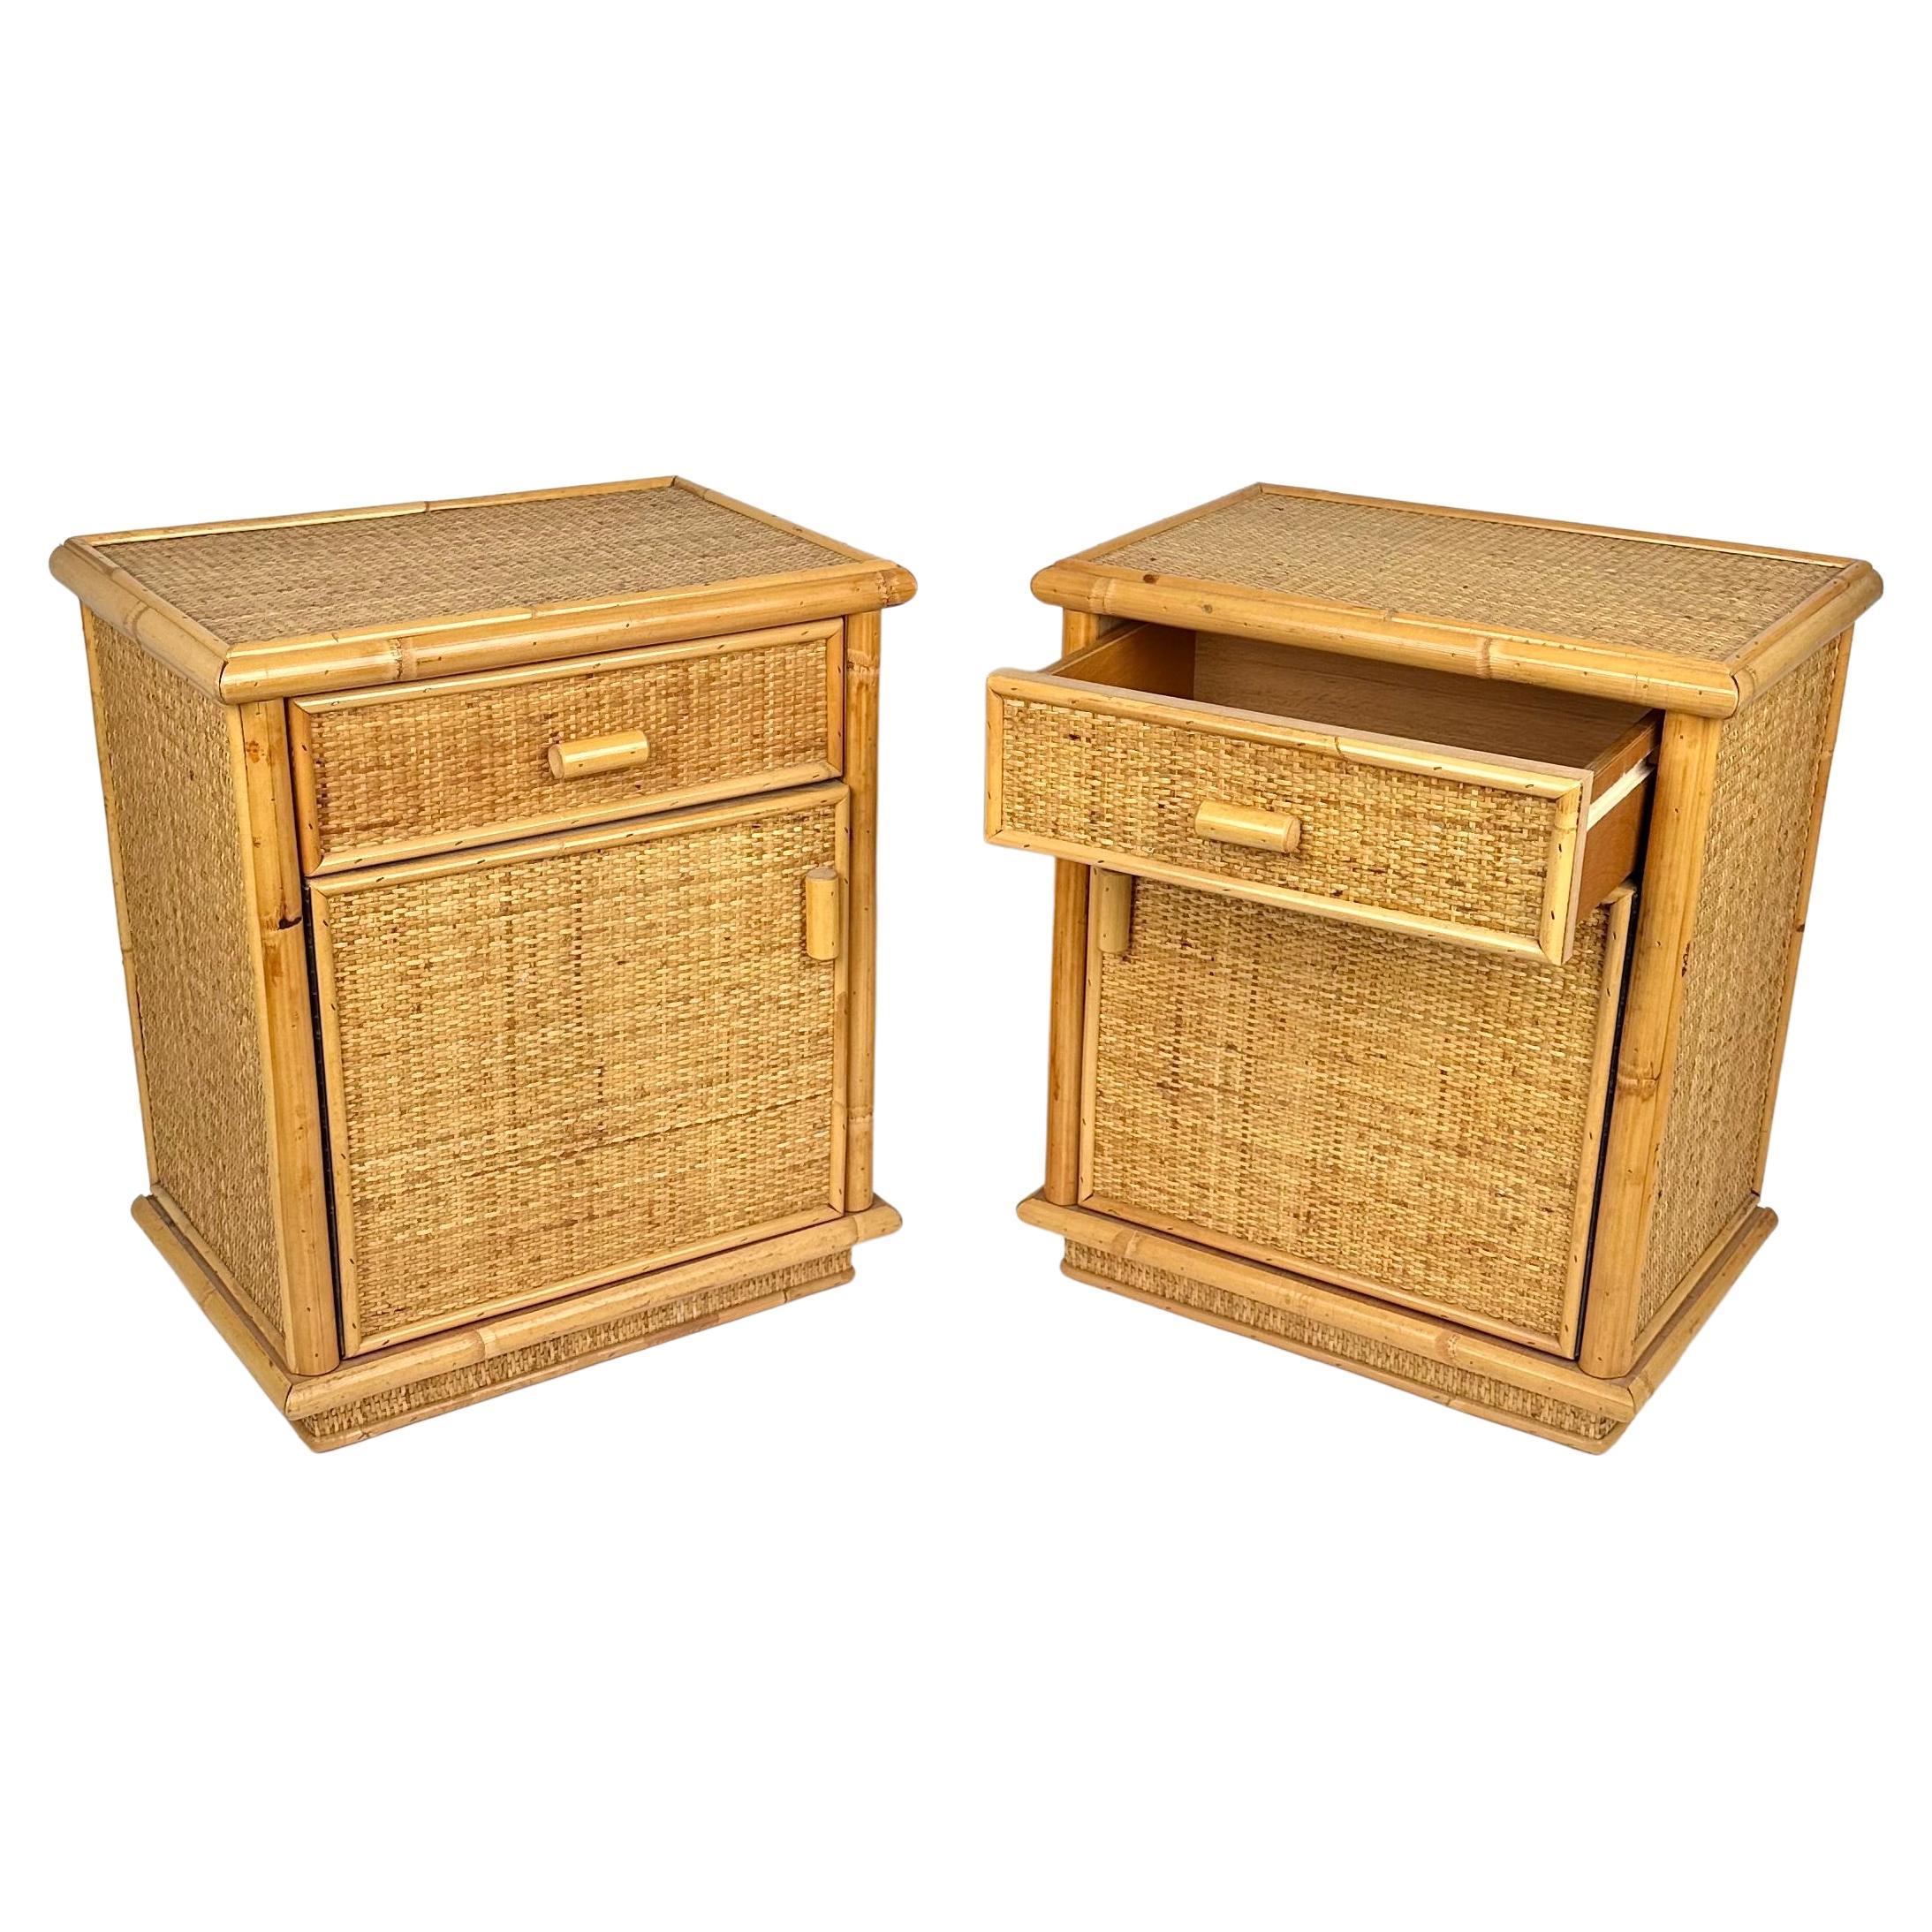 Italian Midcentury Pair of Bed Side Tables Nightstands in Bamboo & Rattan, Italy, 1970s For Sale